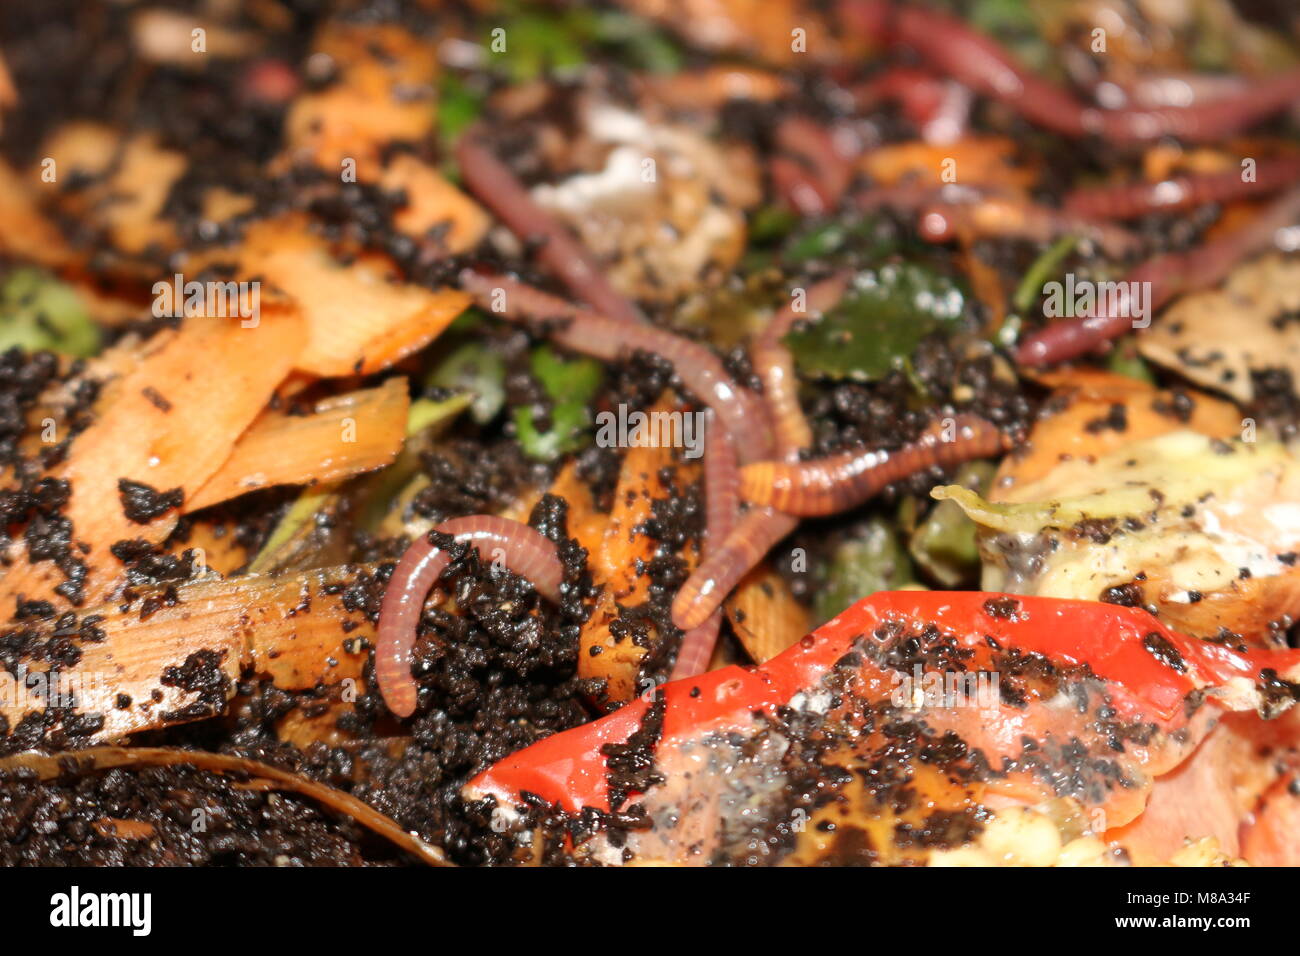 vermicomposting is a way for people with small properties to compost their food waste and produce an organic fertilizer. This photo depicts the worms eating food waste Stock Photo